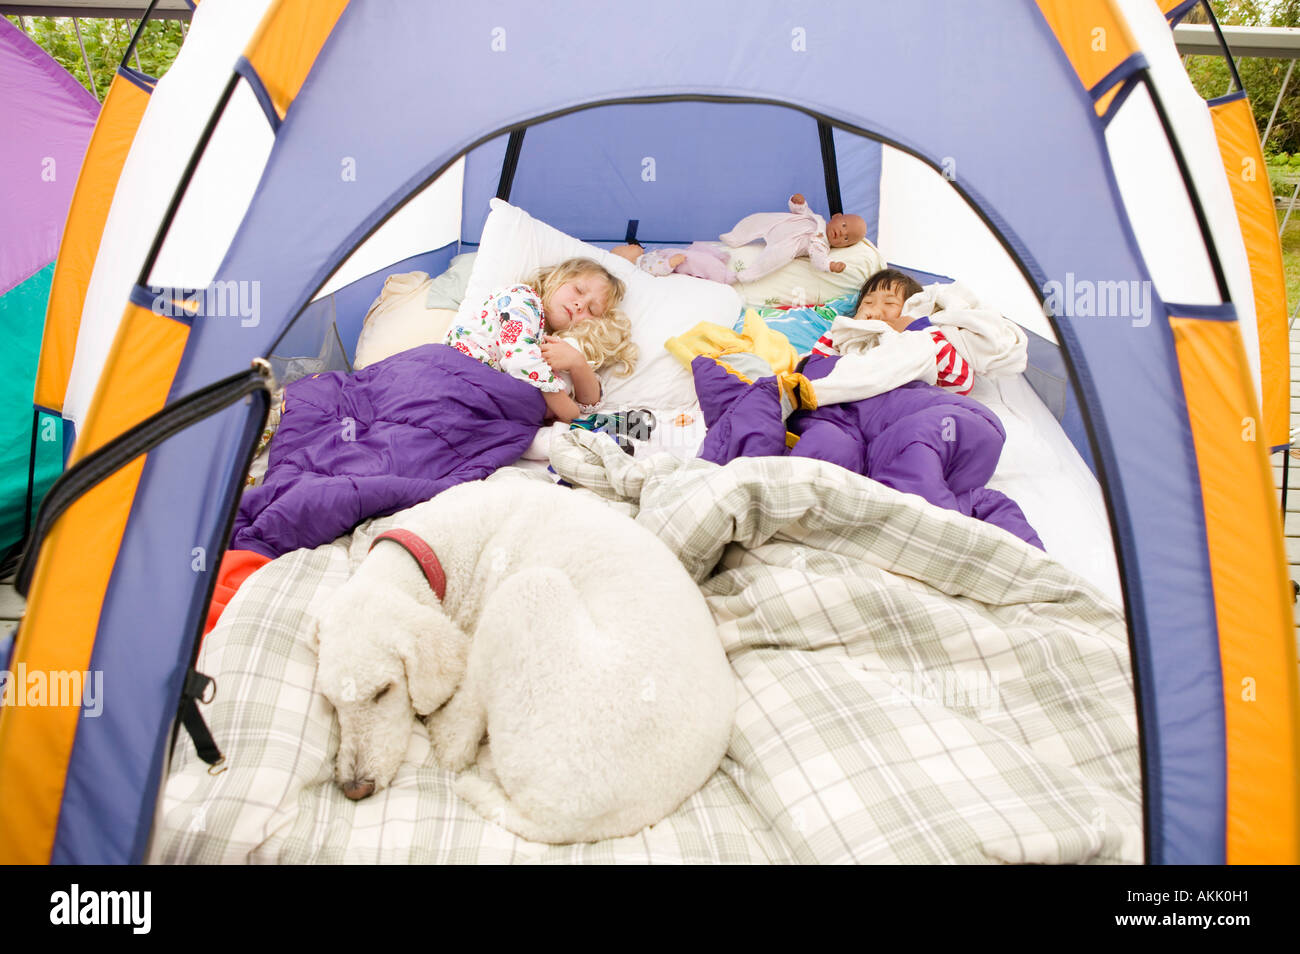 Young girls sleeping in tent with dog Stock Photo